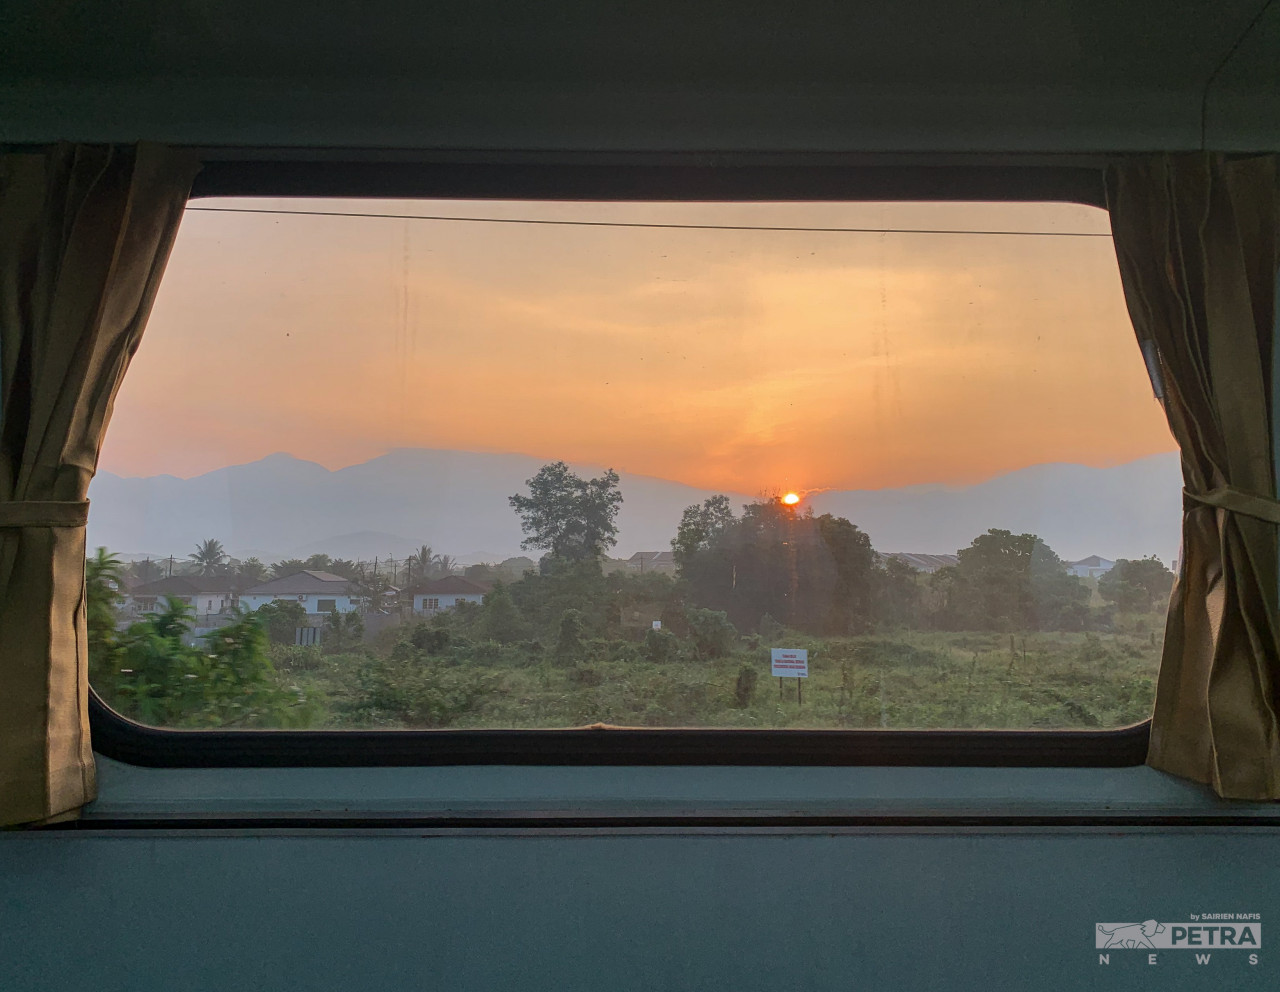 The picturesque morning scenery on the KTMB XKB coach service to Tanjung Malim from Kuala Lumpur. – SAIRIEN NAFIS/The Vibes pic, February 7, 2022 